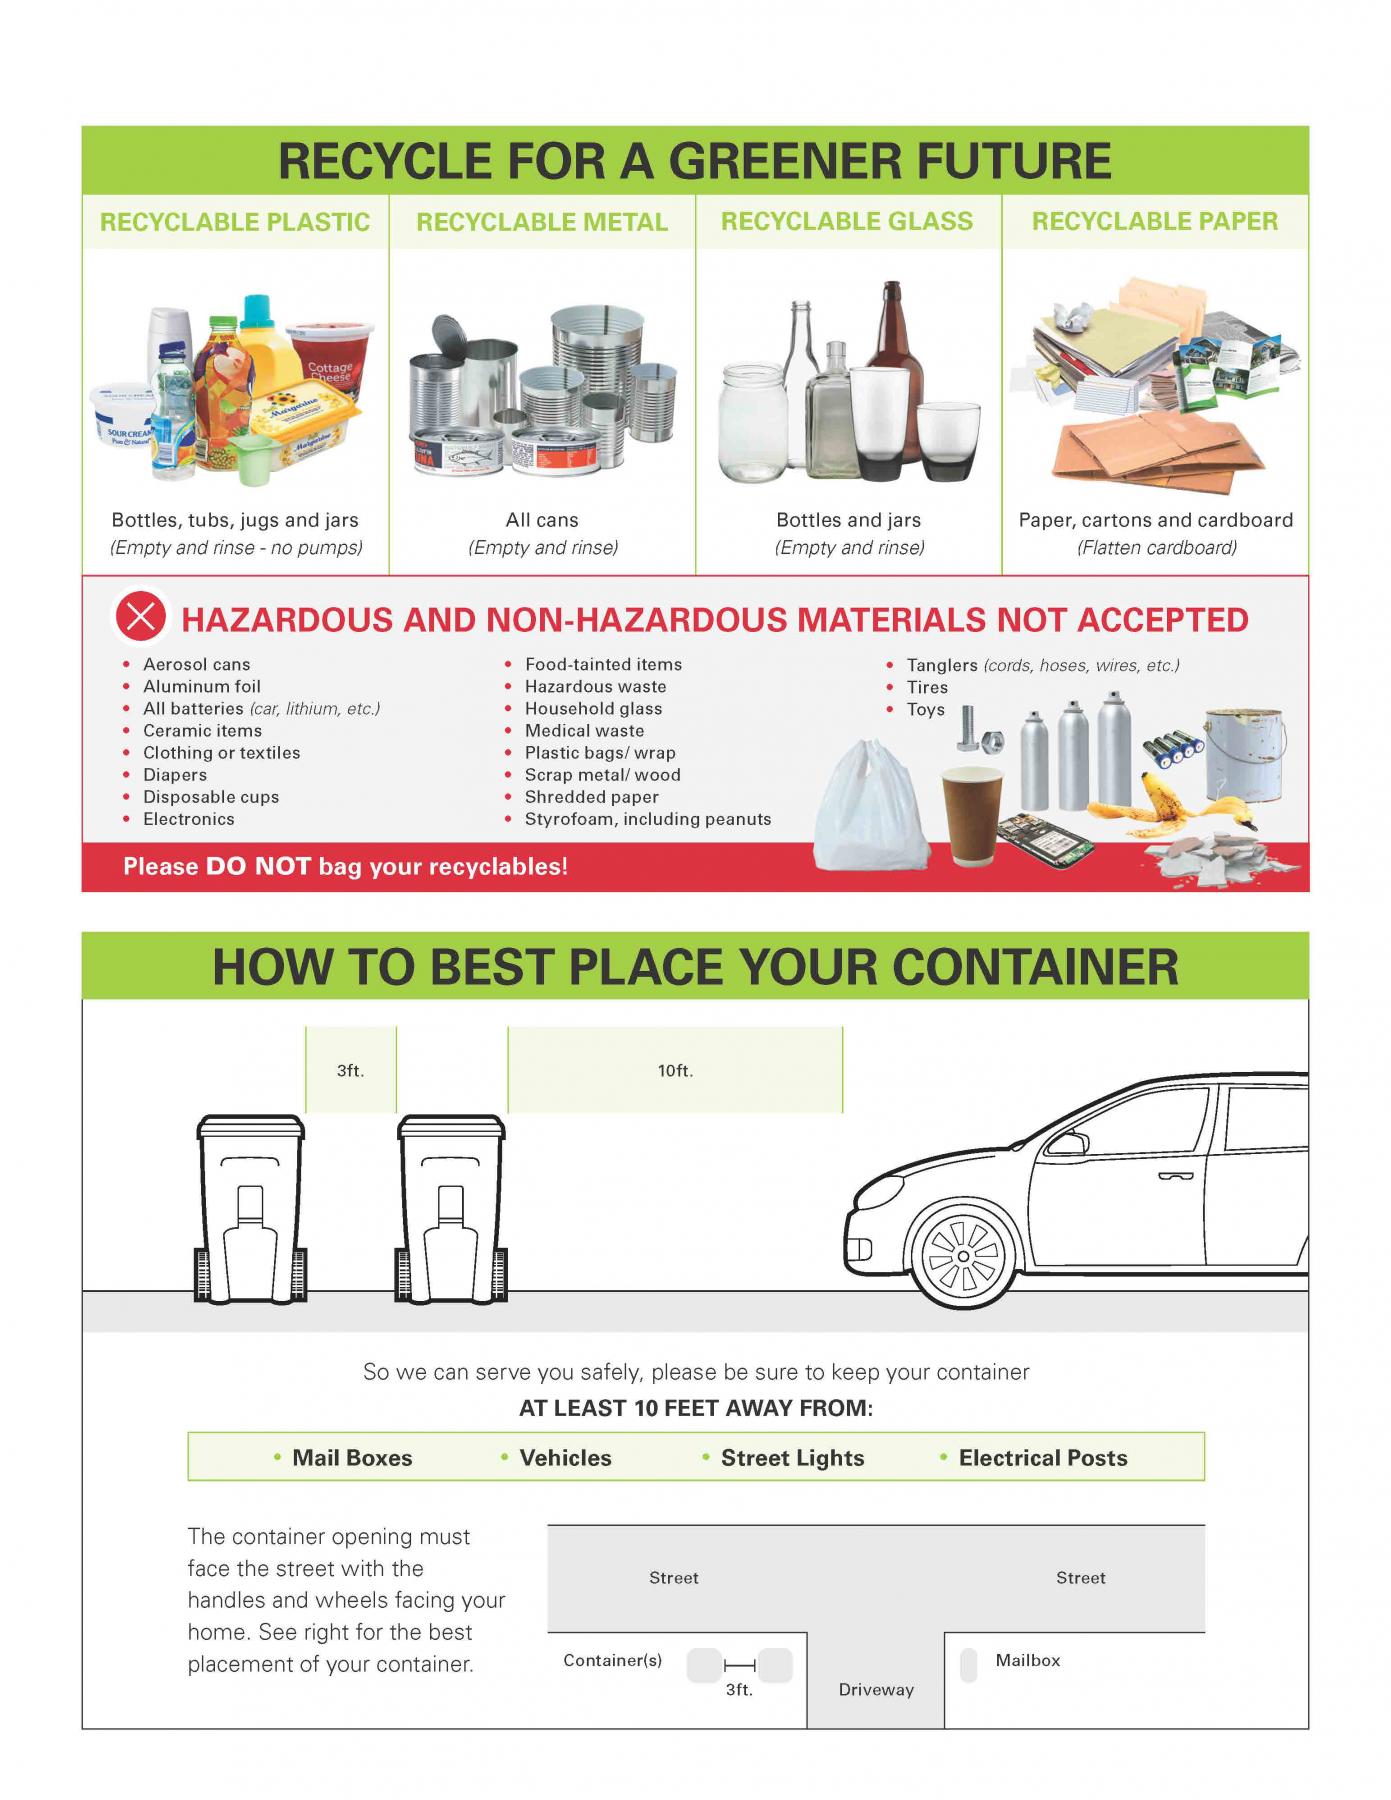 Recycling Guide 2020